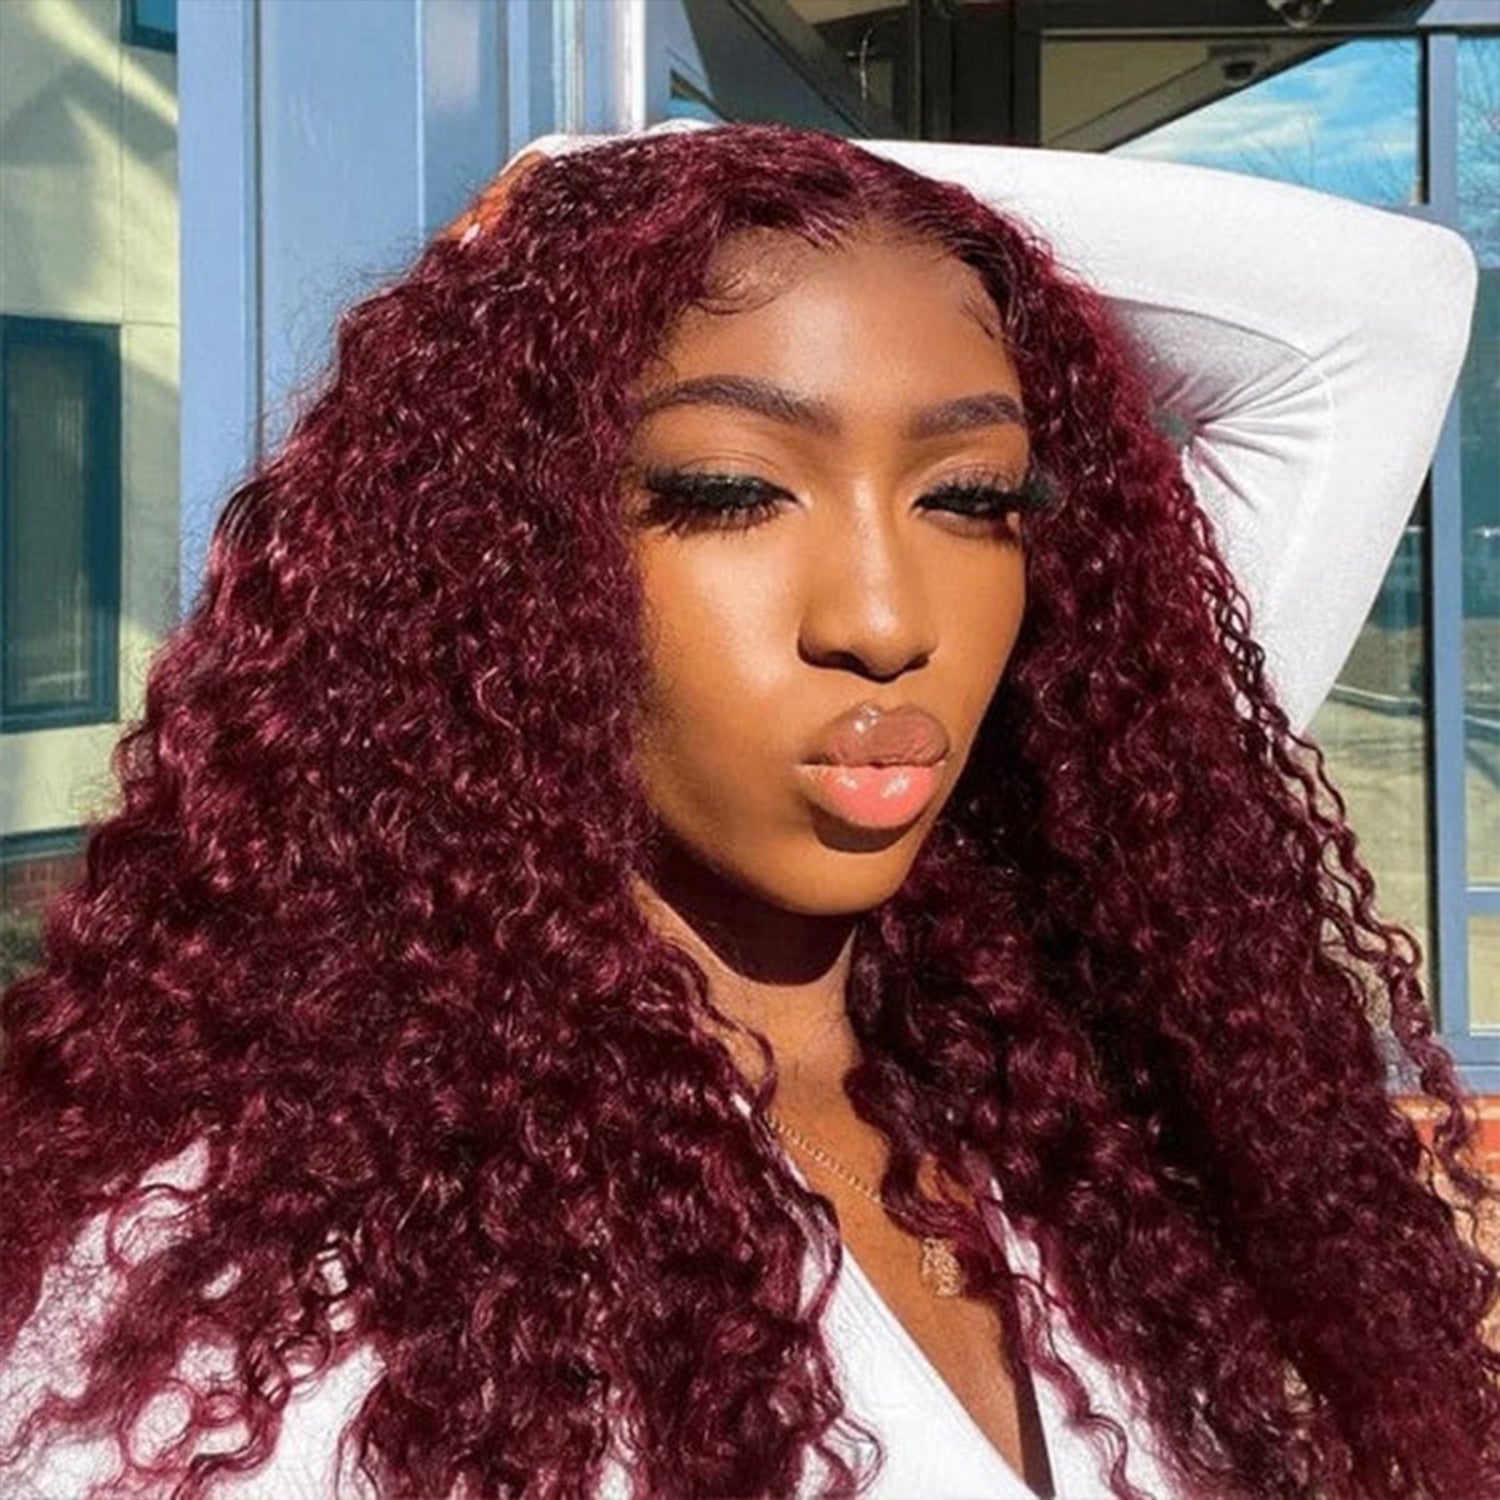 The T part wig is quite versatile and you can style it in as many ways as people do with a lace front wig, It’s wearable right out the box, Most classic reddish color for any occasion, Best vacation hair style, Pre-colored in redwine burgundy, Low maintenance hairstyle